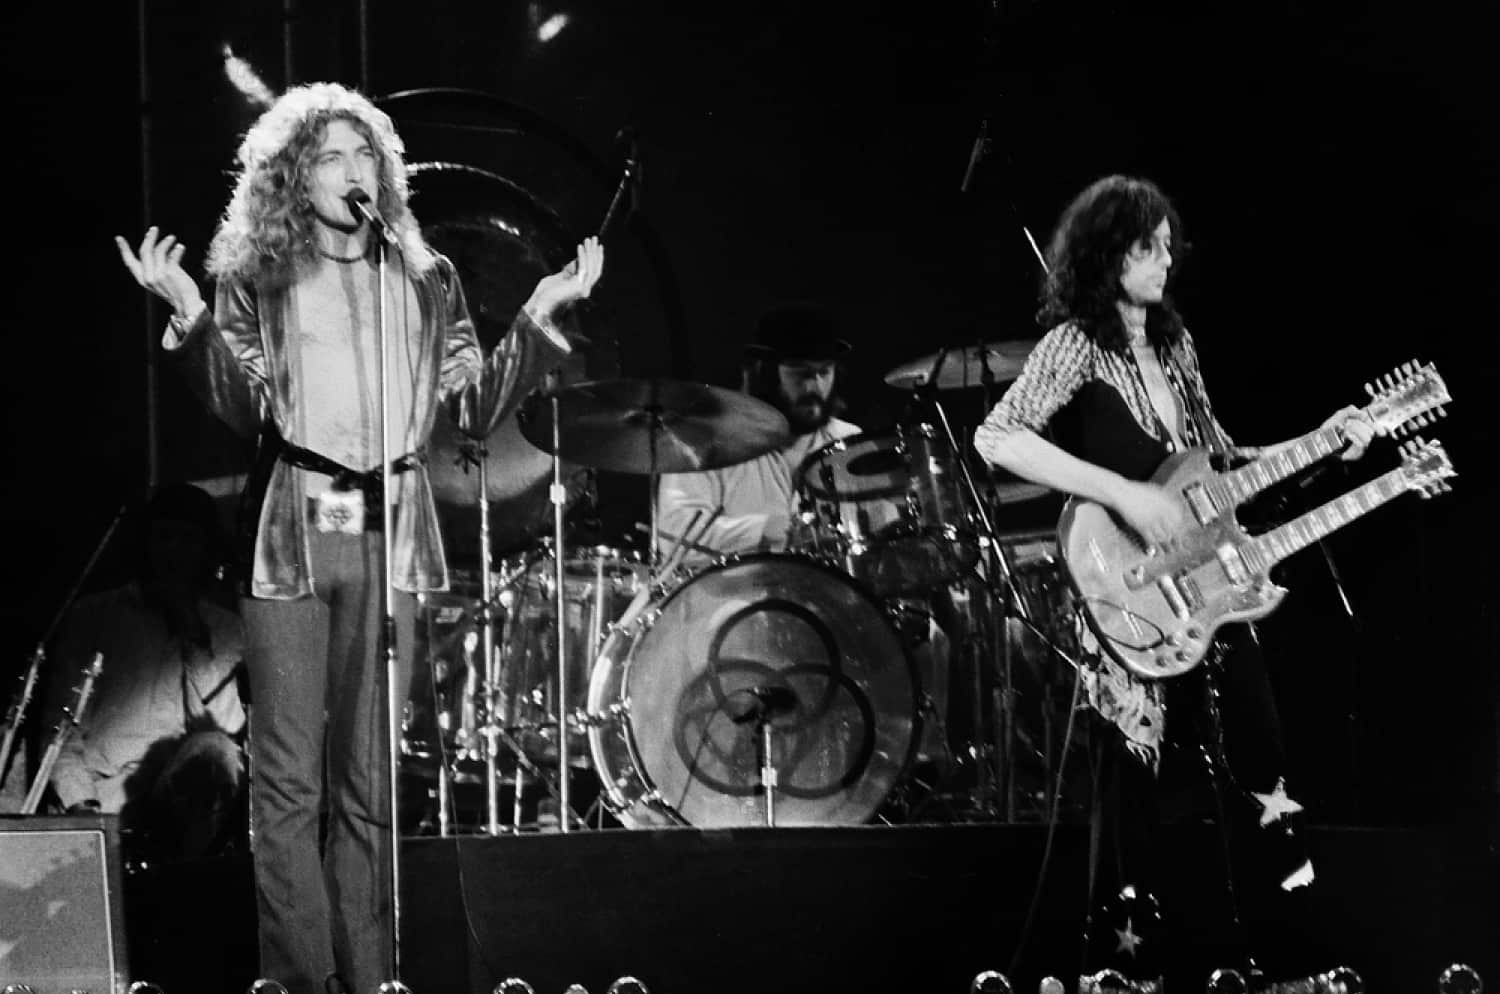 Led Zeppelin the Greatest Rock Band